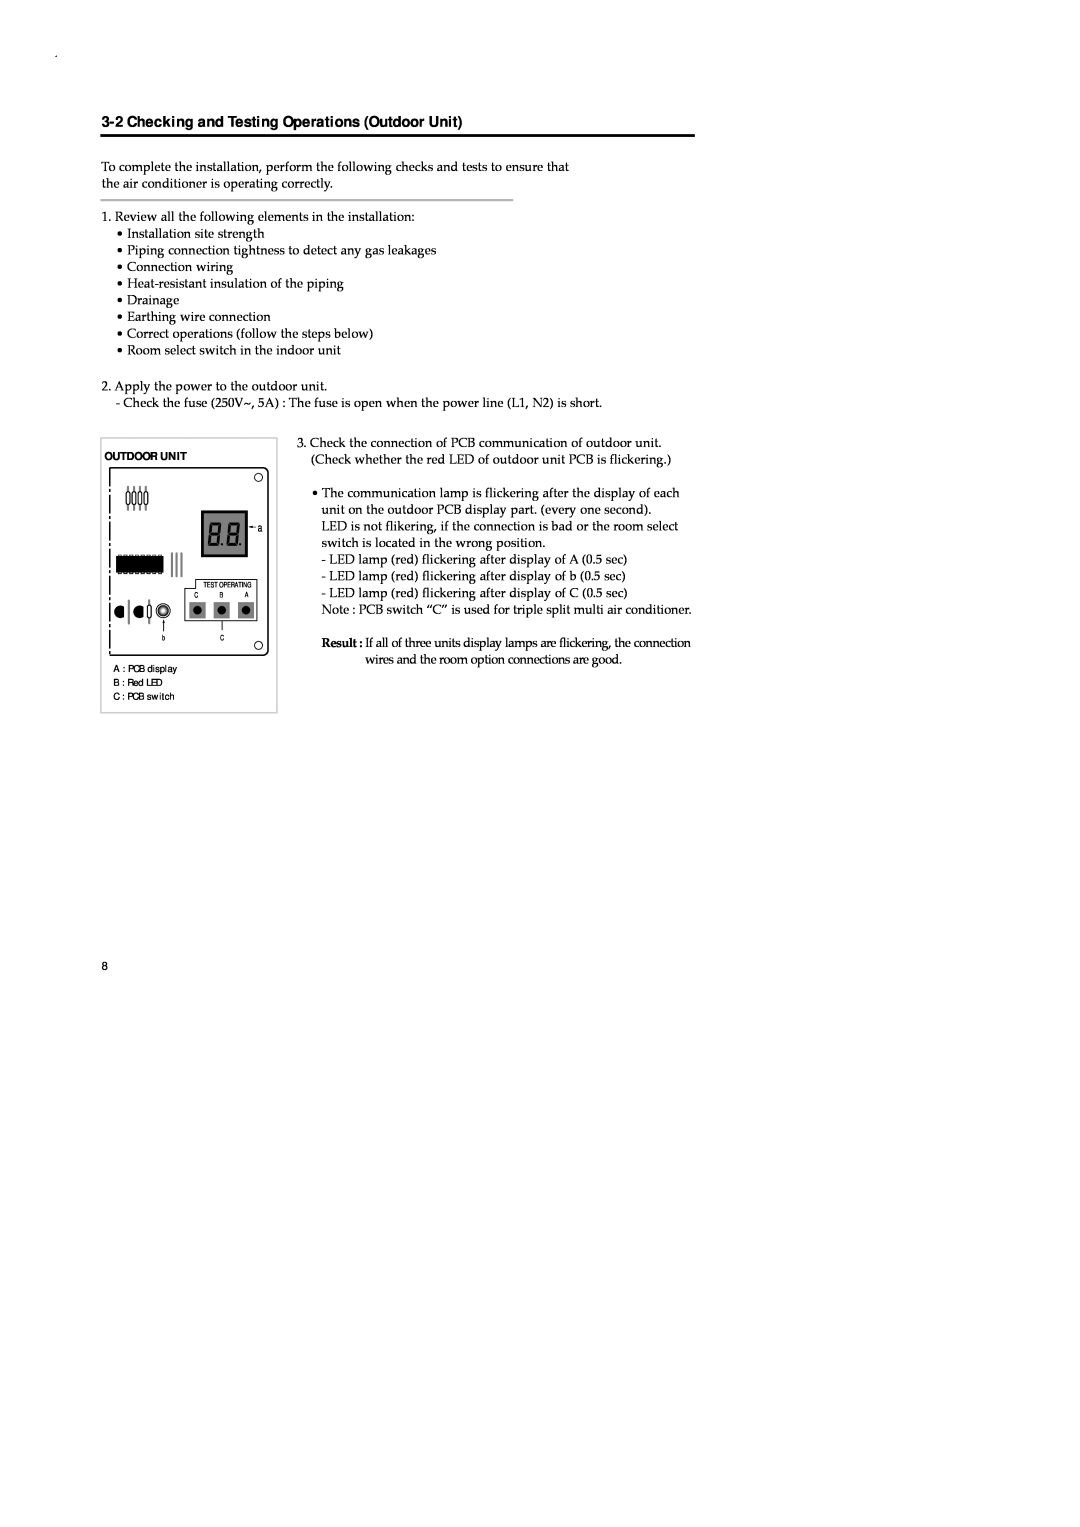 Samsung UD18B1C2, UD26B1C2, AD18B1C09, AD26B1C13 service manual 3-2Checking and Testing Operations Outdoor Unit 